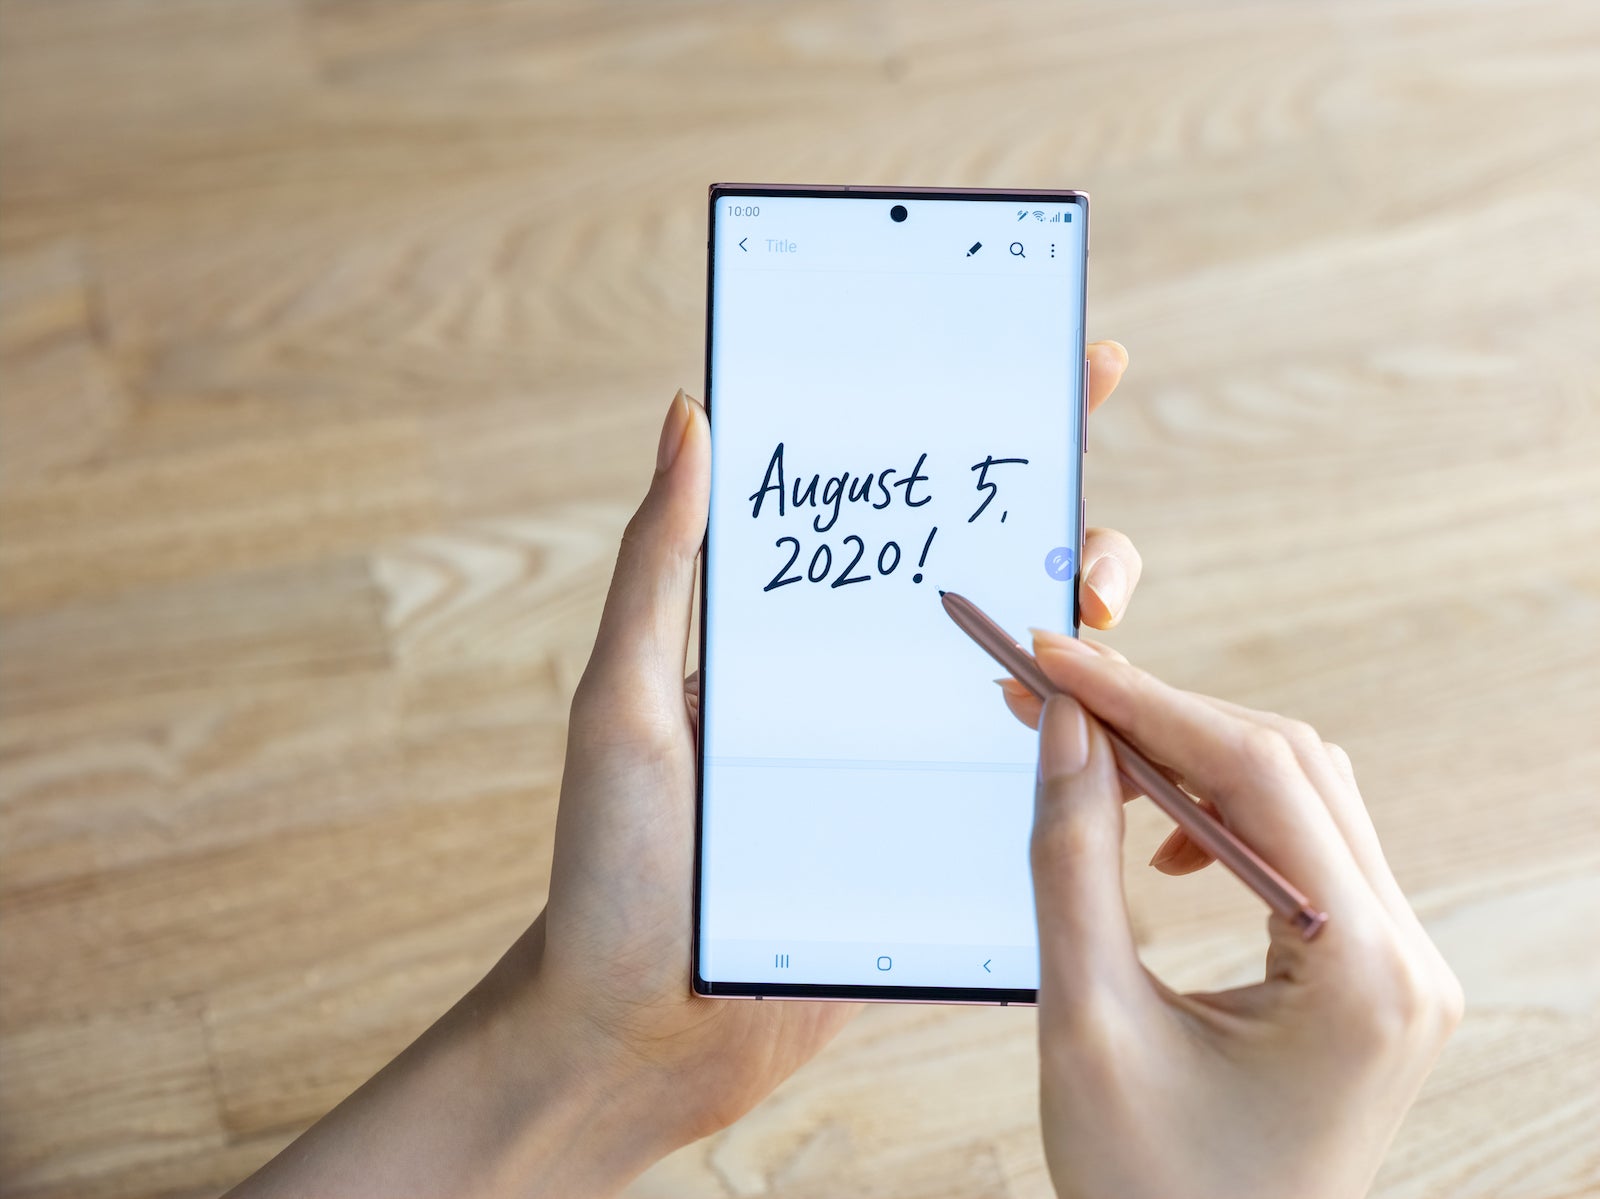 Galaxy Note 20 release date, price, features and news